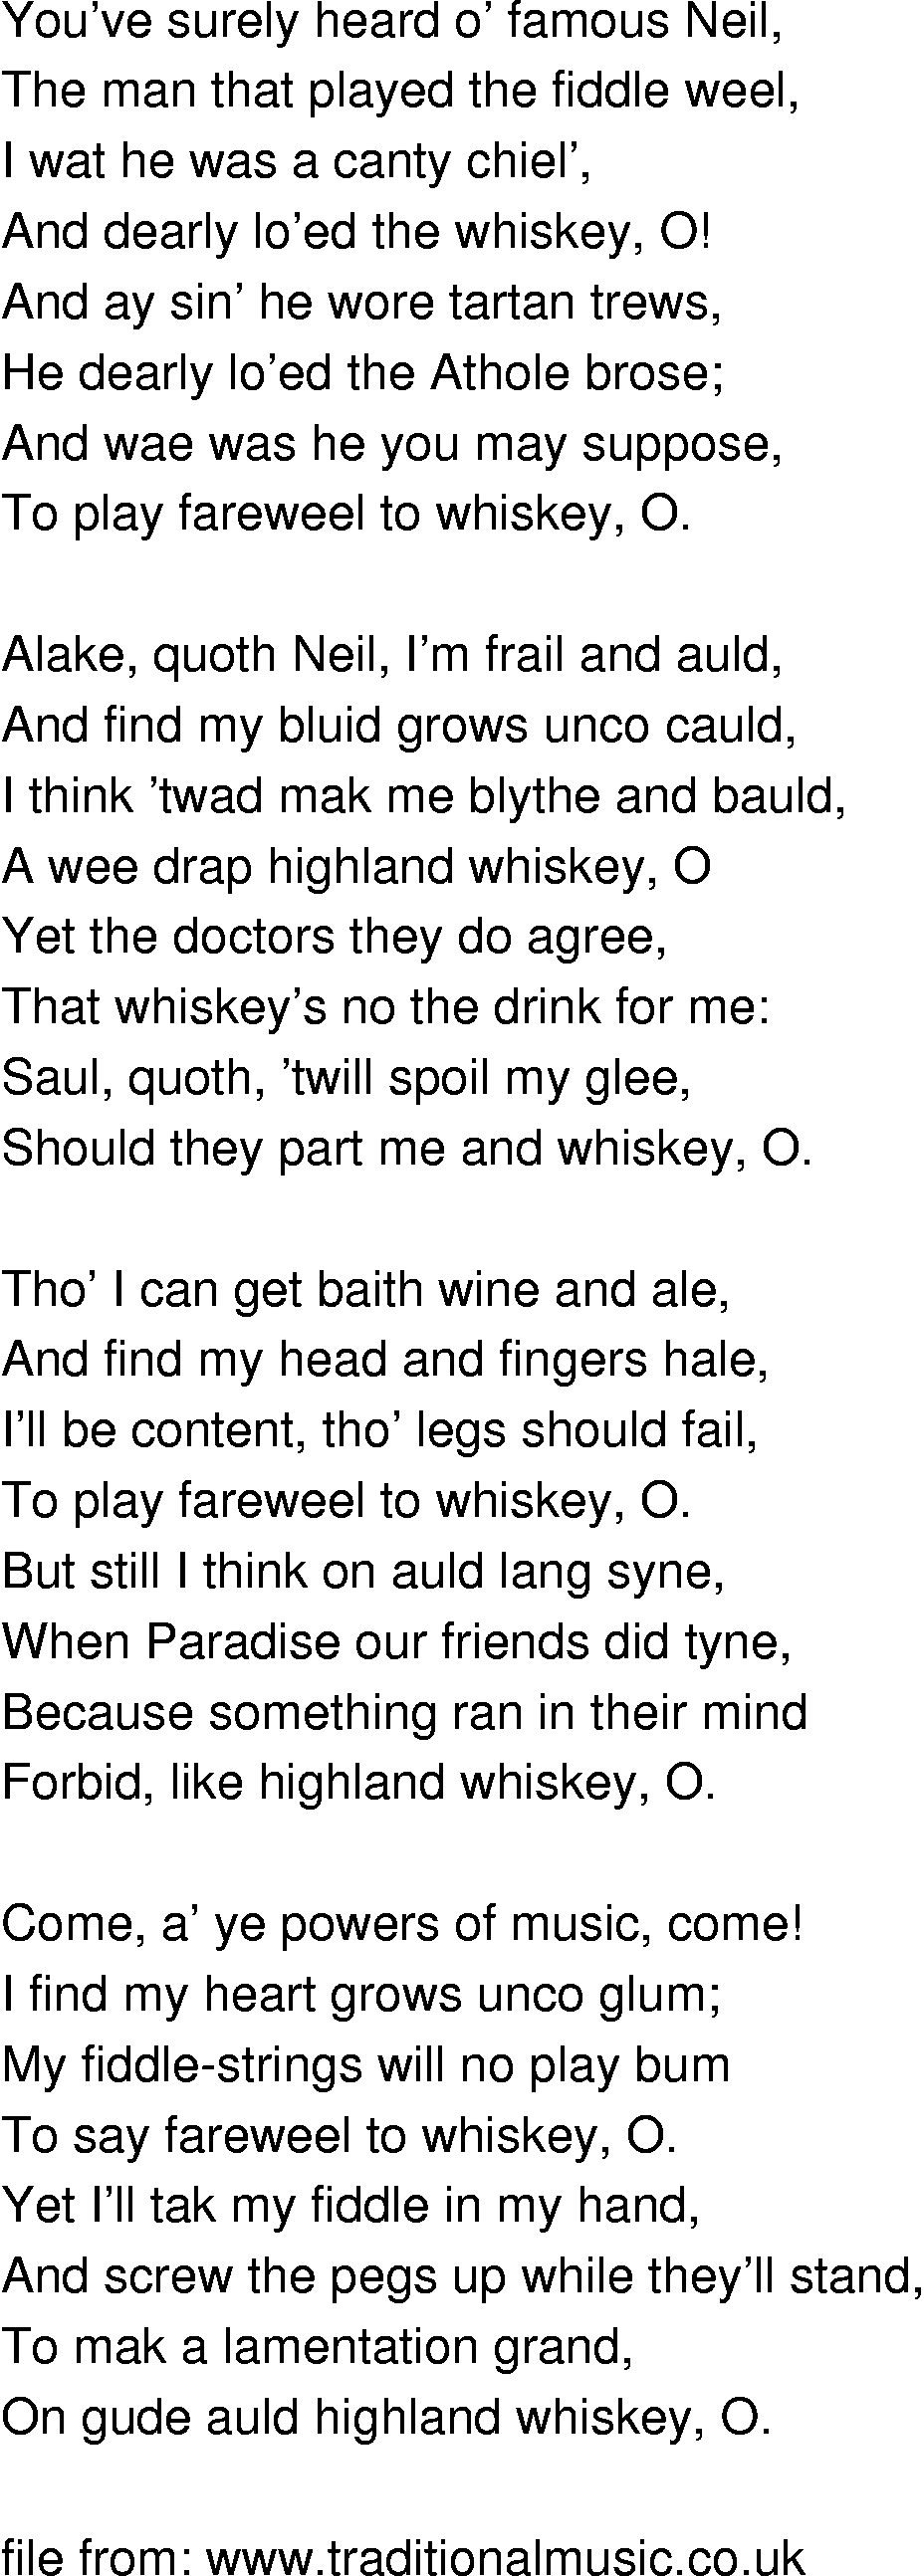 Old-Time (oldtimey) Song Lyrics - farewell to whisky